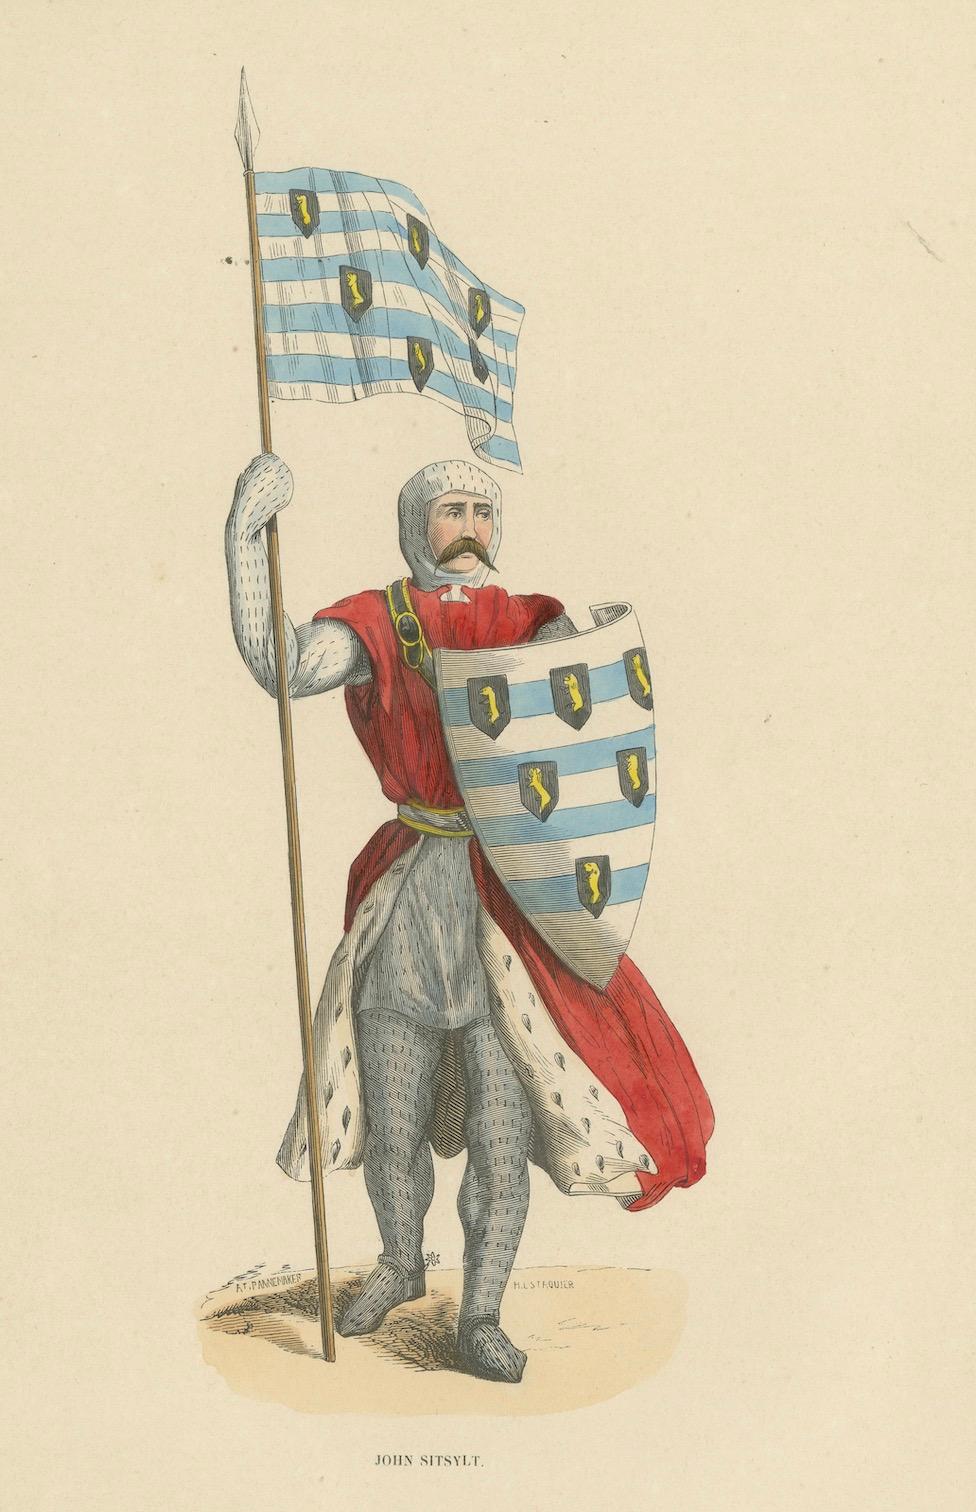 Paper John Sitsylt, the Heraldic Knight in an Original Hand-Colored Lithograph of 1847 For Sale